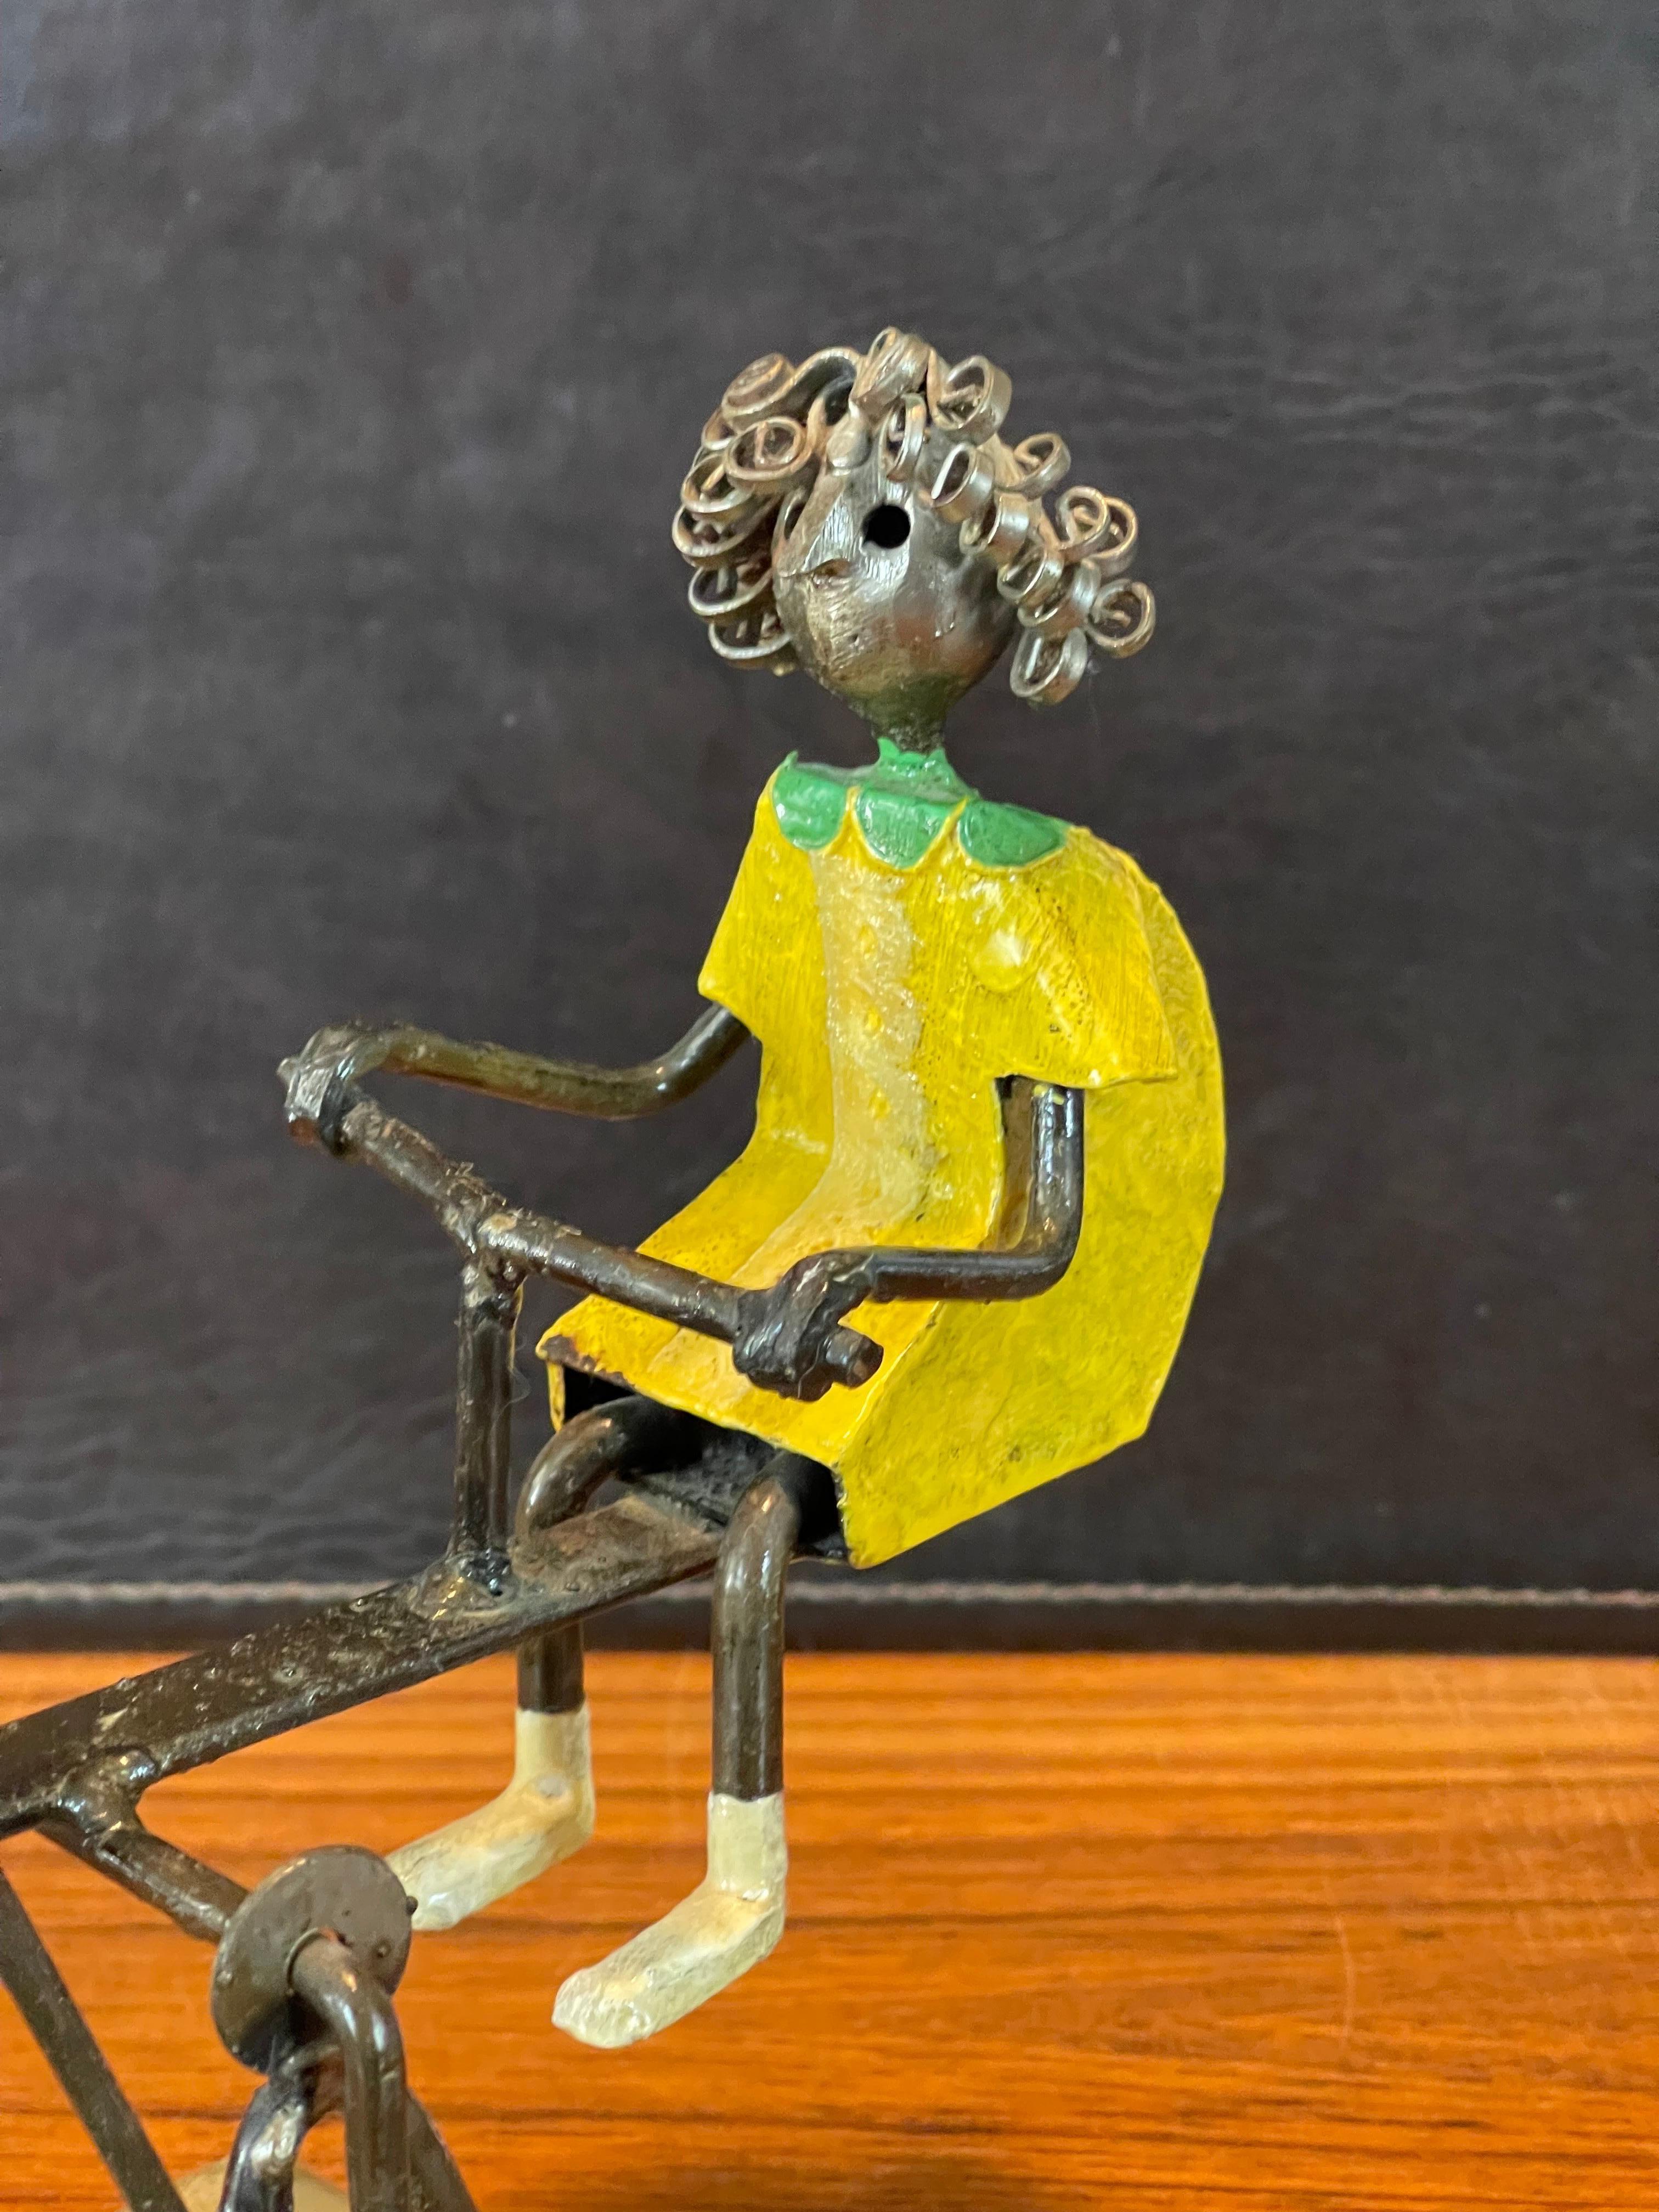 20th Century Eclectic Painted Metal See Saw /Teeter Totter Sculpture by Manuel Felguerez For Sale